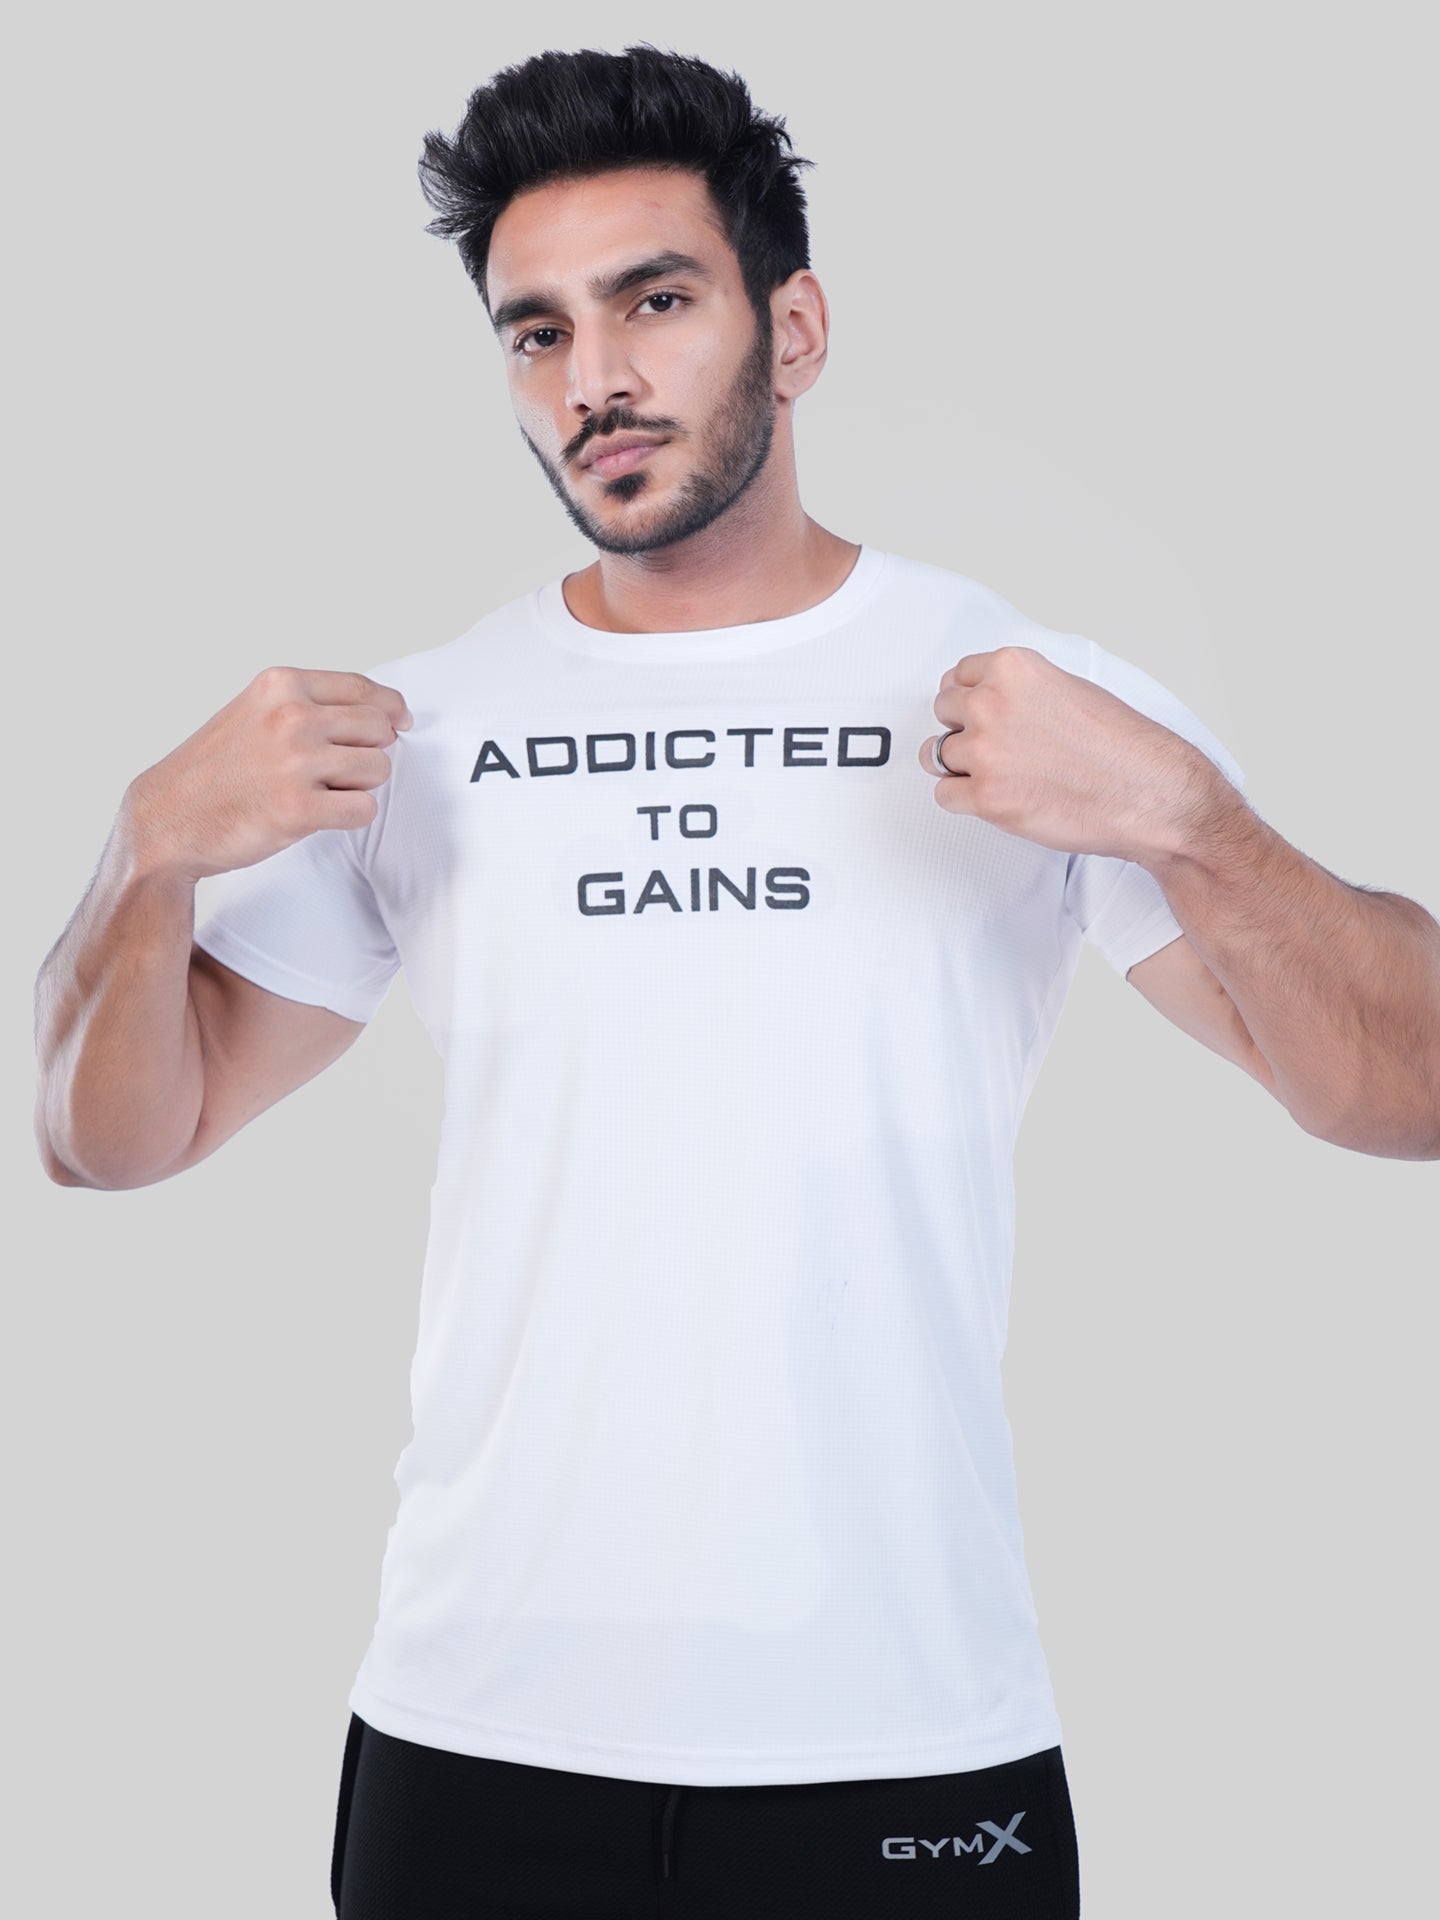 GymX Ultra Lite White Tee: Addicted To Gains